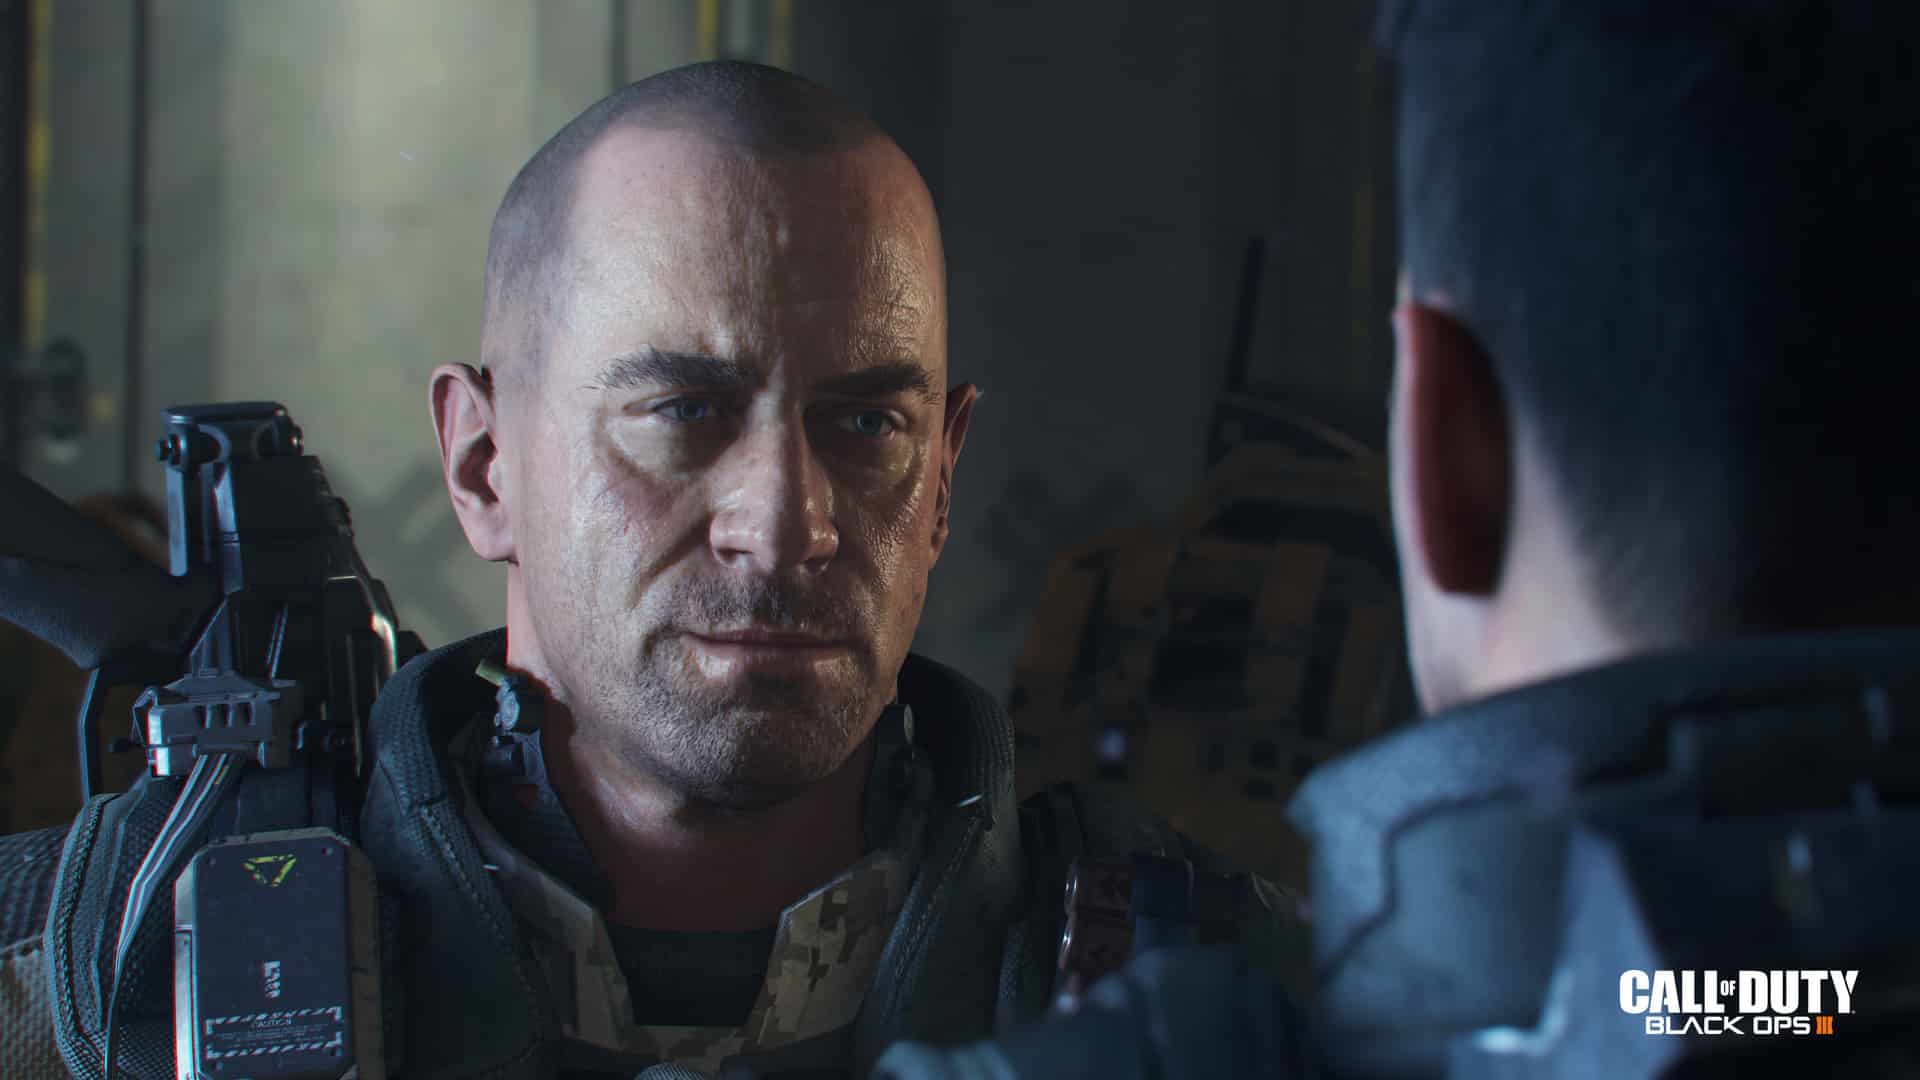 Activision Treyarch Call of Duty: Black Ops III sci-fi conspiracy thriller with excellent story, gameplay mechanics